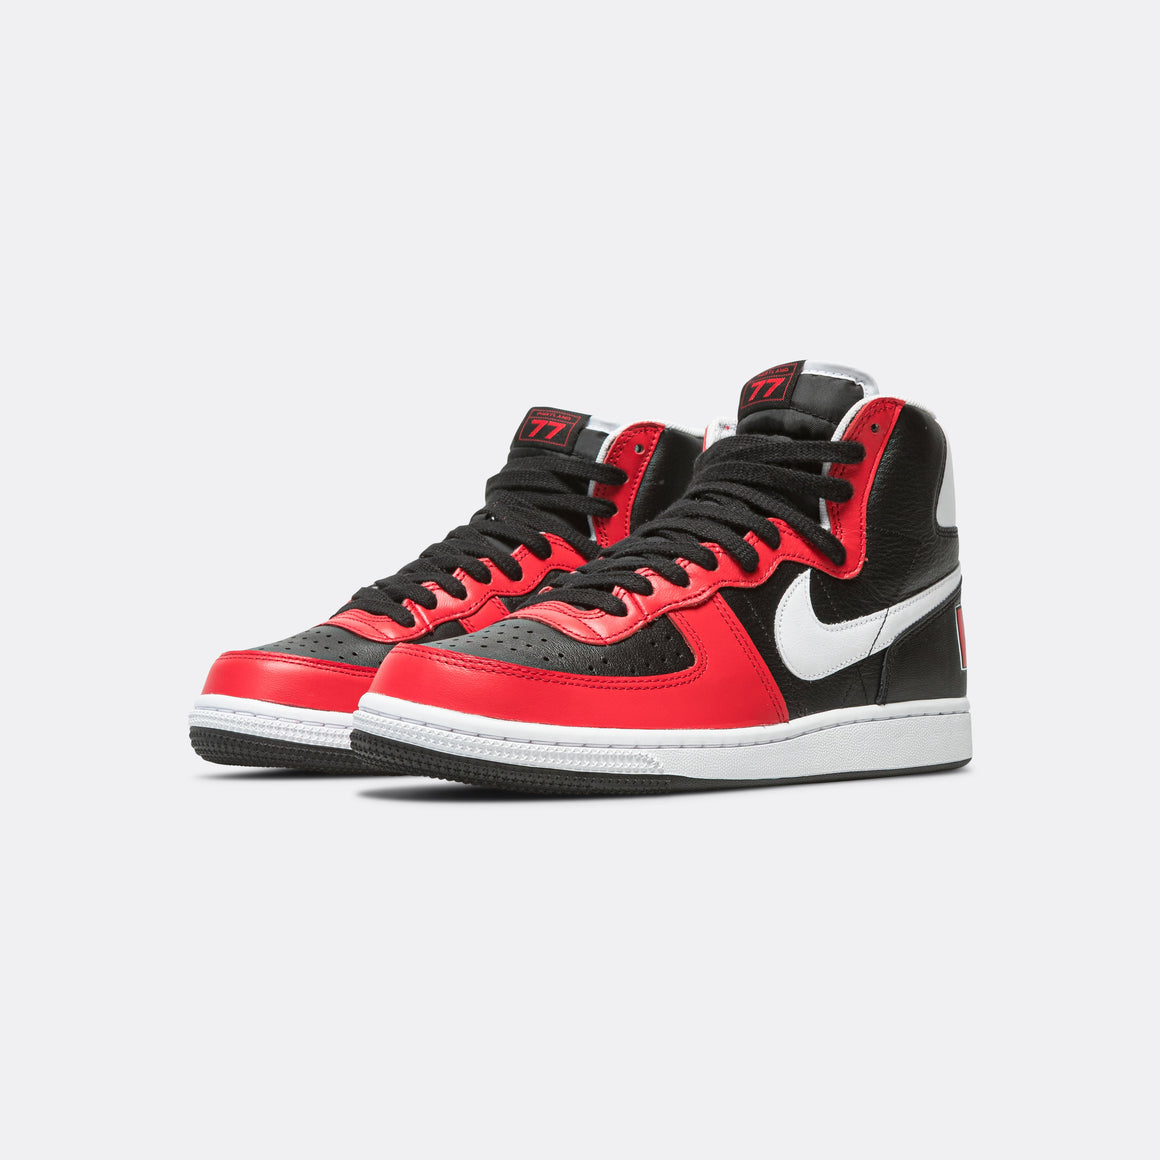 Nike - Terminator High - Black/White-University Red - UP THERE